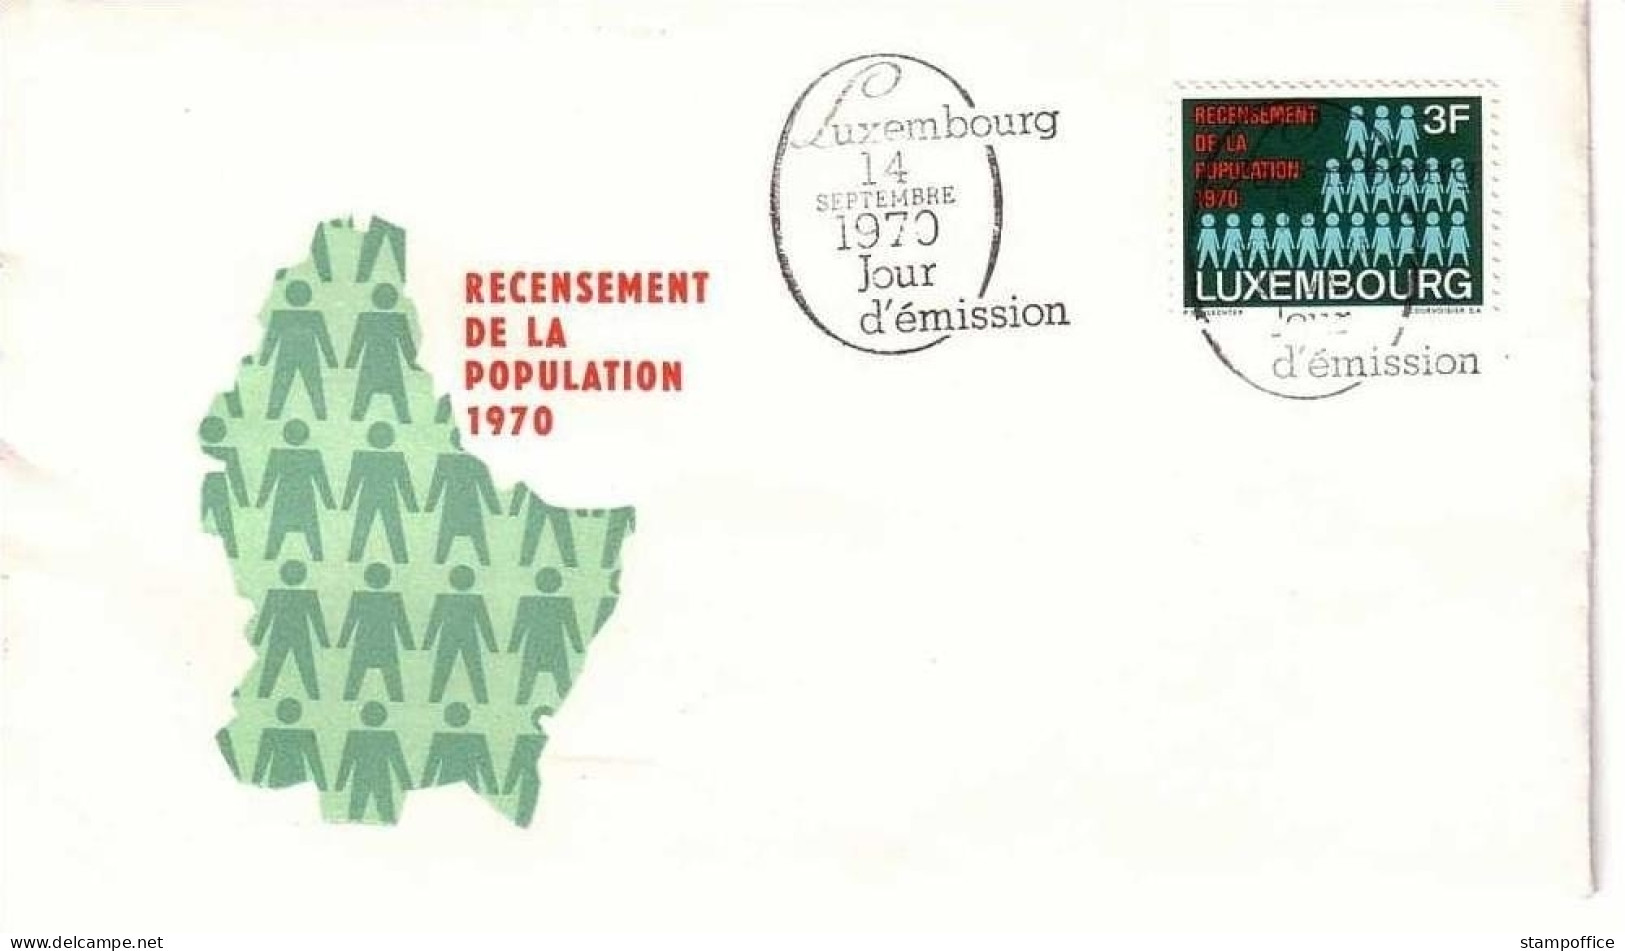 LUXEMBOURG MI-NR. 811 FDC VOLKSZÄHLUNG - FDC